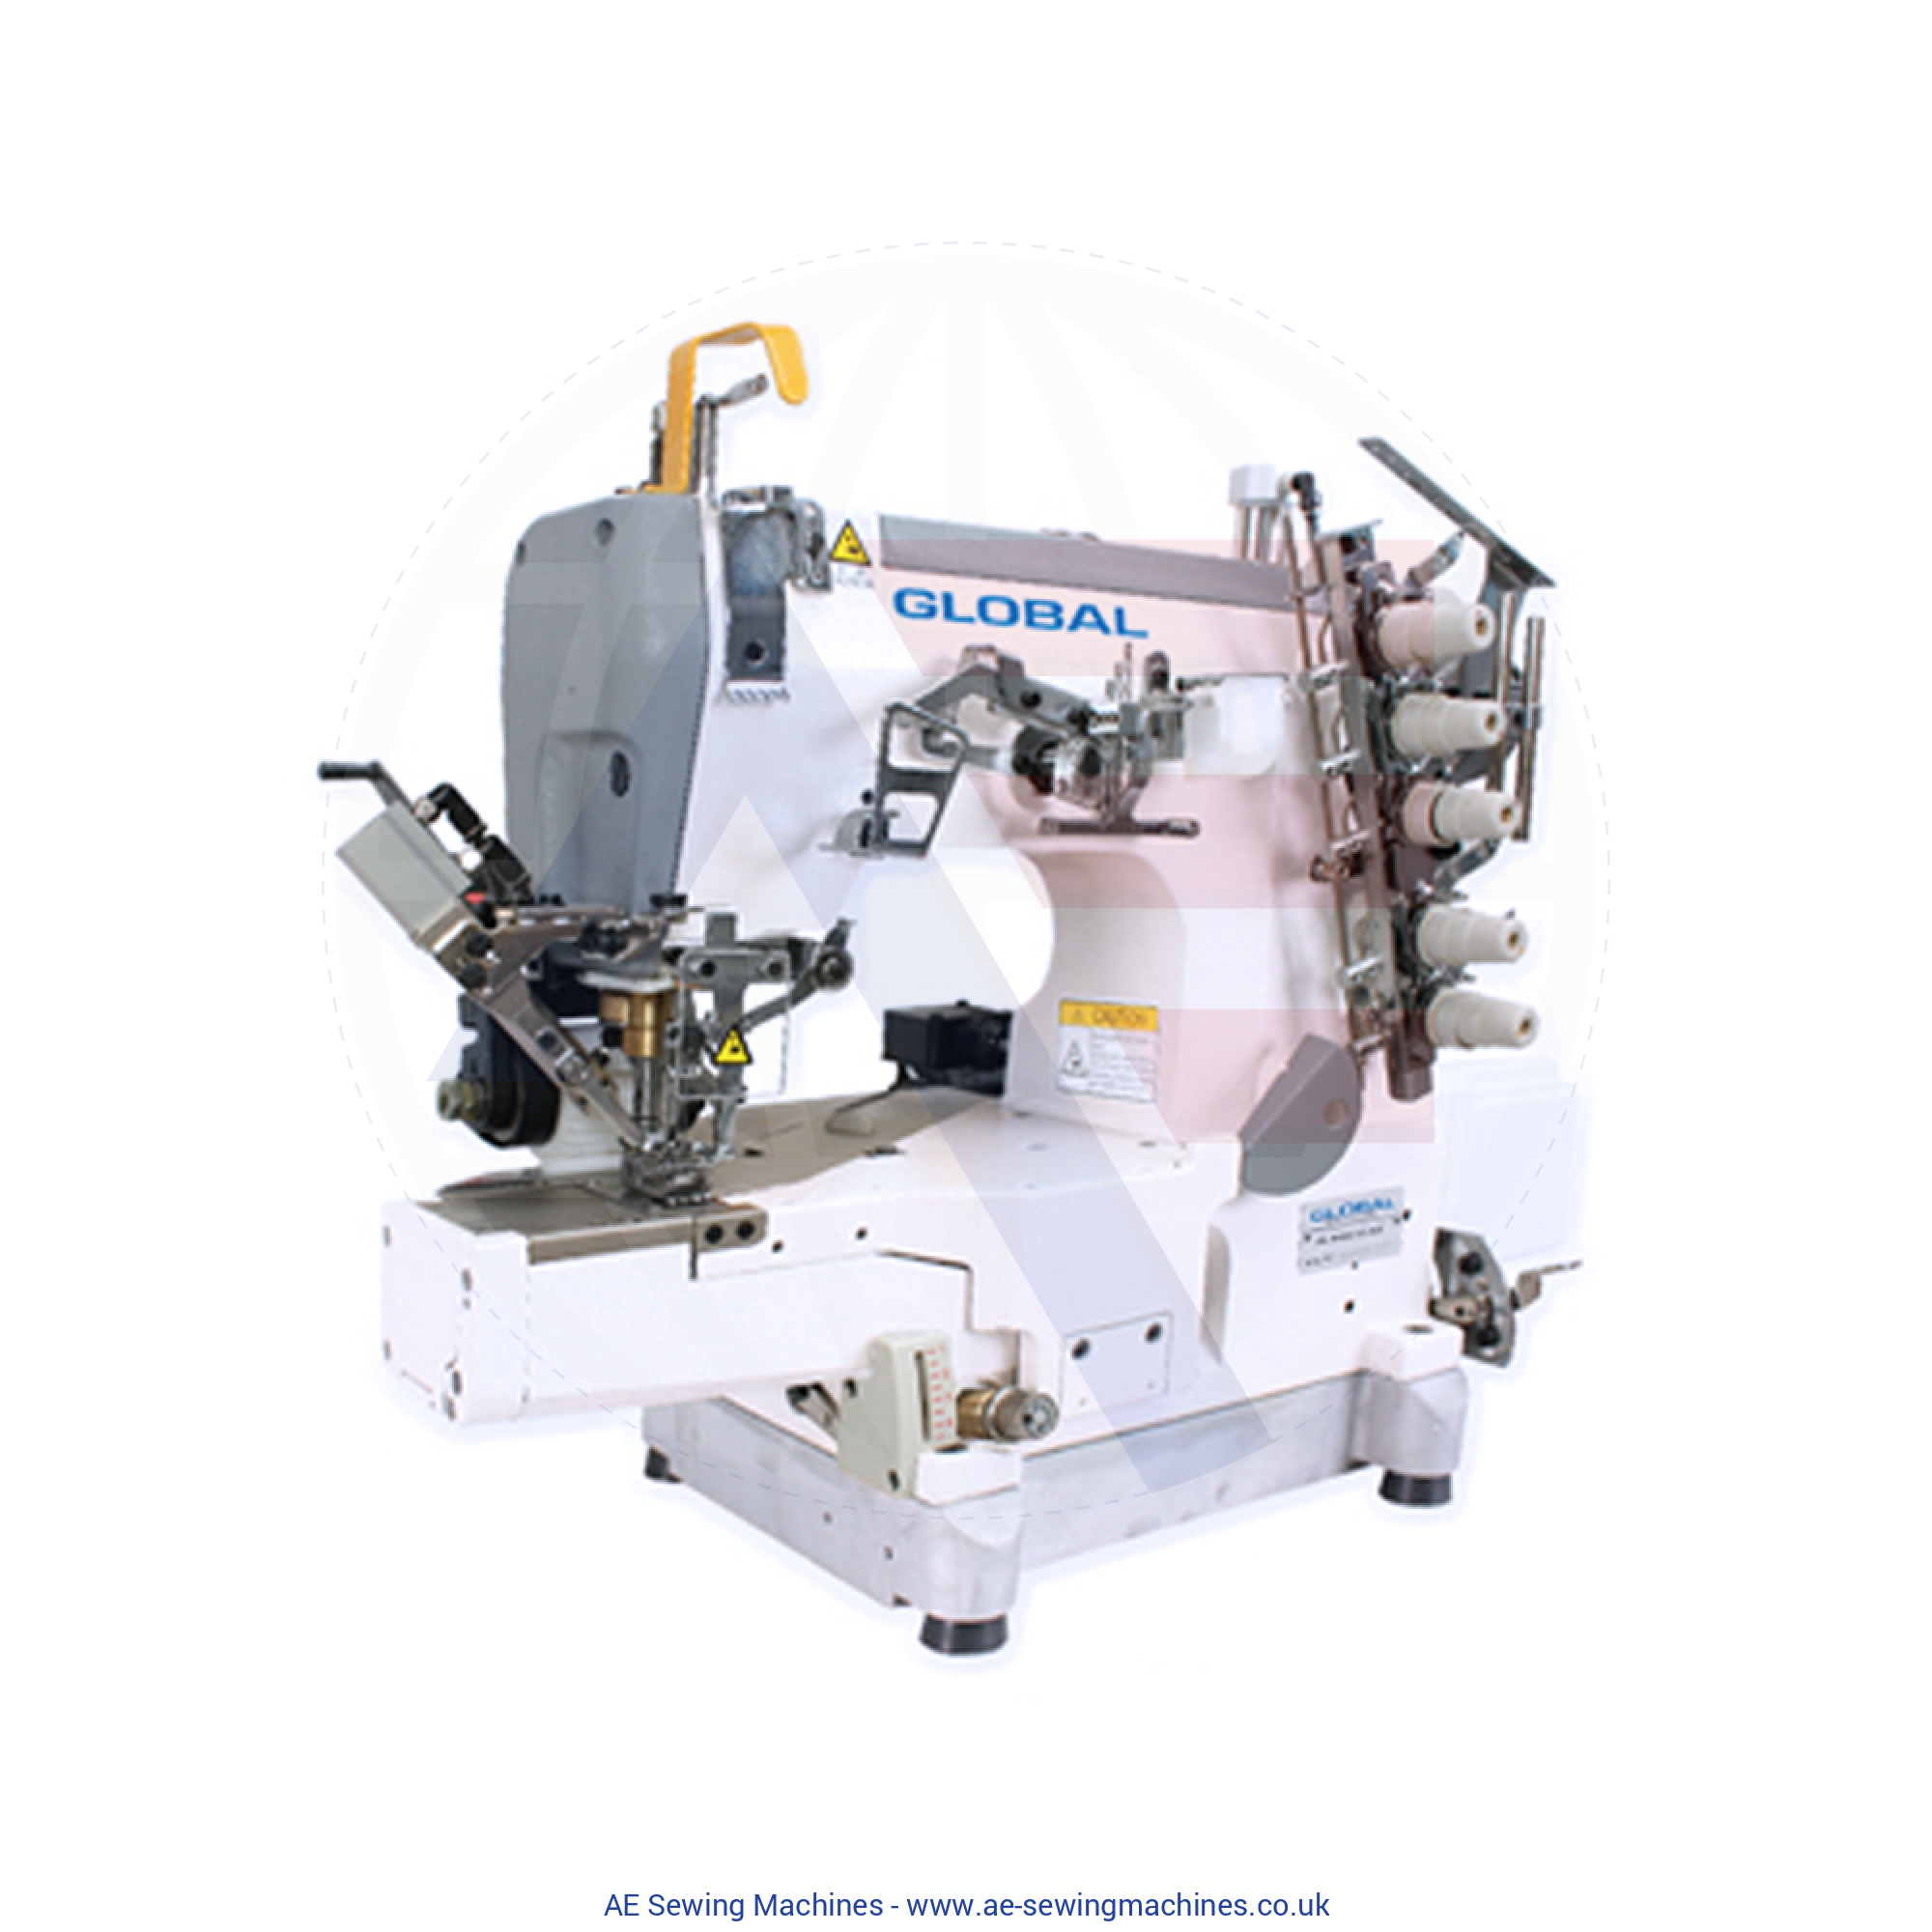 Global Cb 3700 Series Cylinder-Bed Coverstitch Machine Sewing Machines